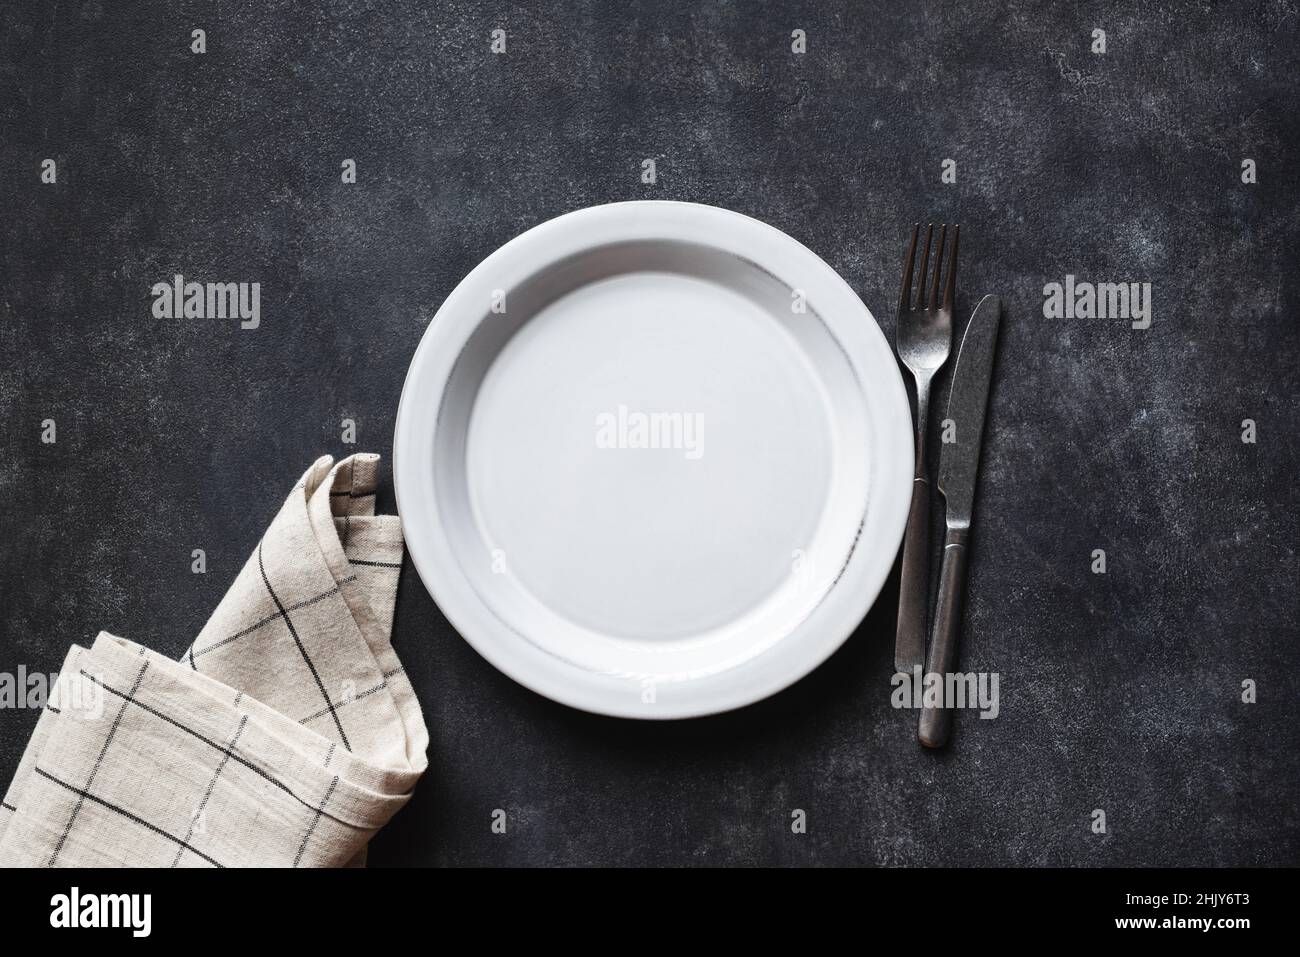 Empty plate, cutlery and linen table textile on black concrete table background. Top view copy space. Kitchen table setting Stock Photo